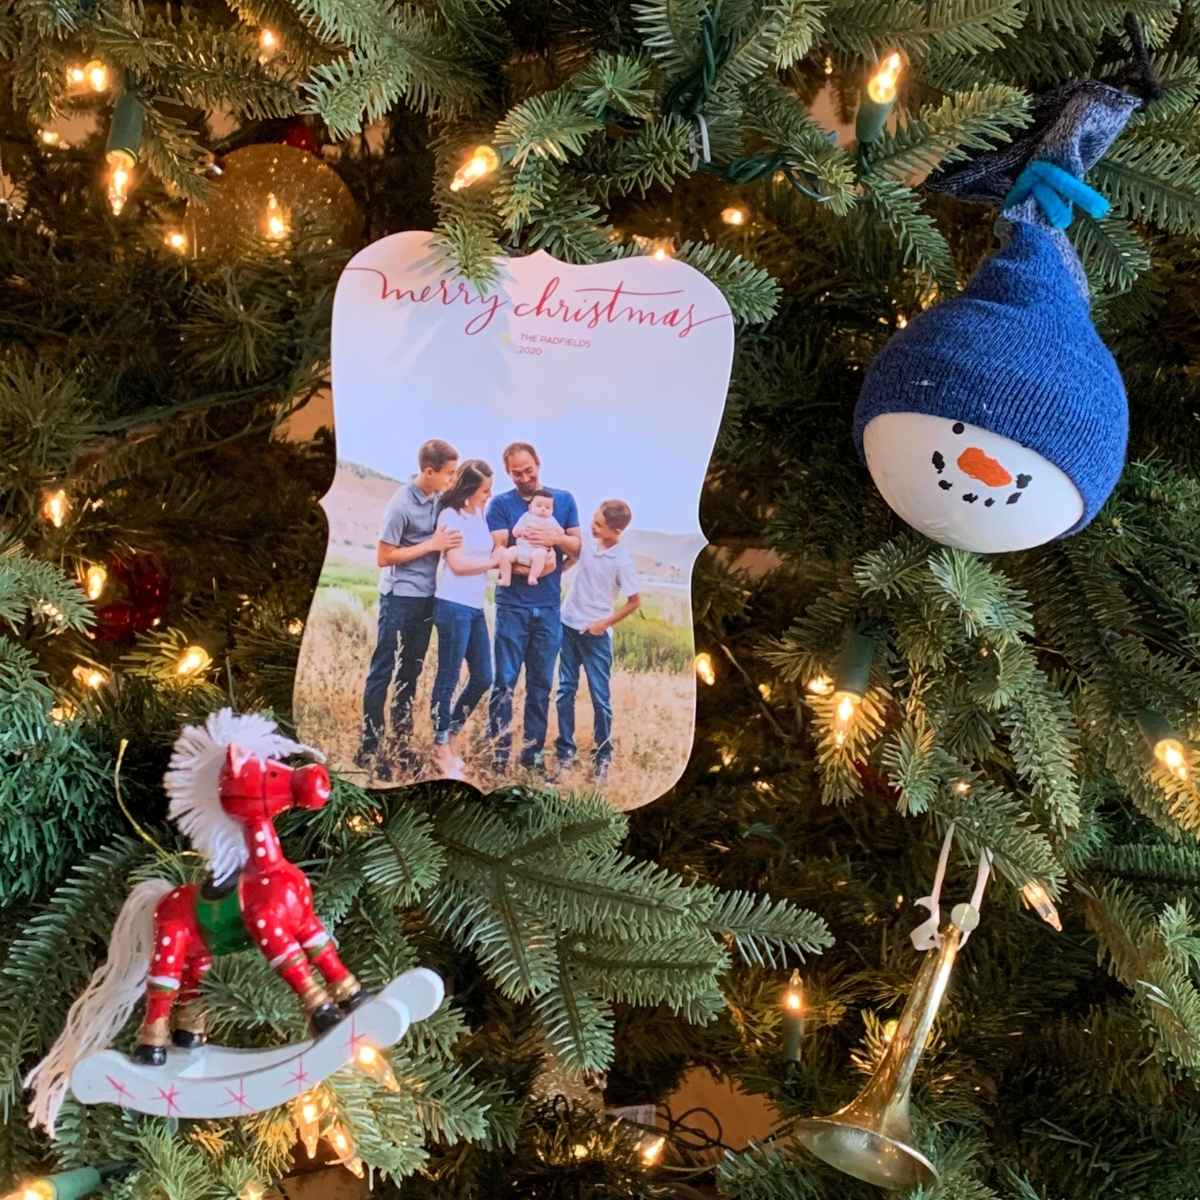 christmas cards used as ornaments on a christmas tree